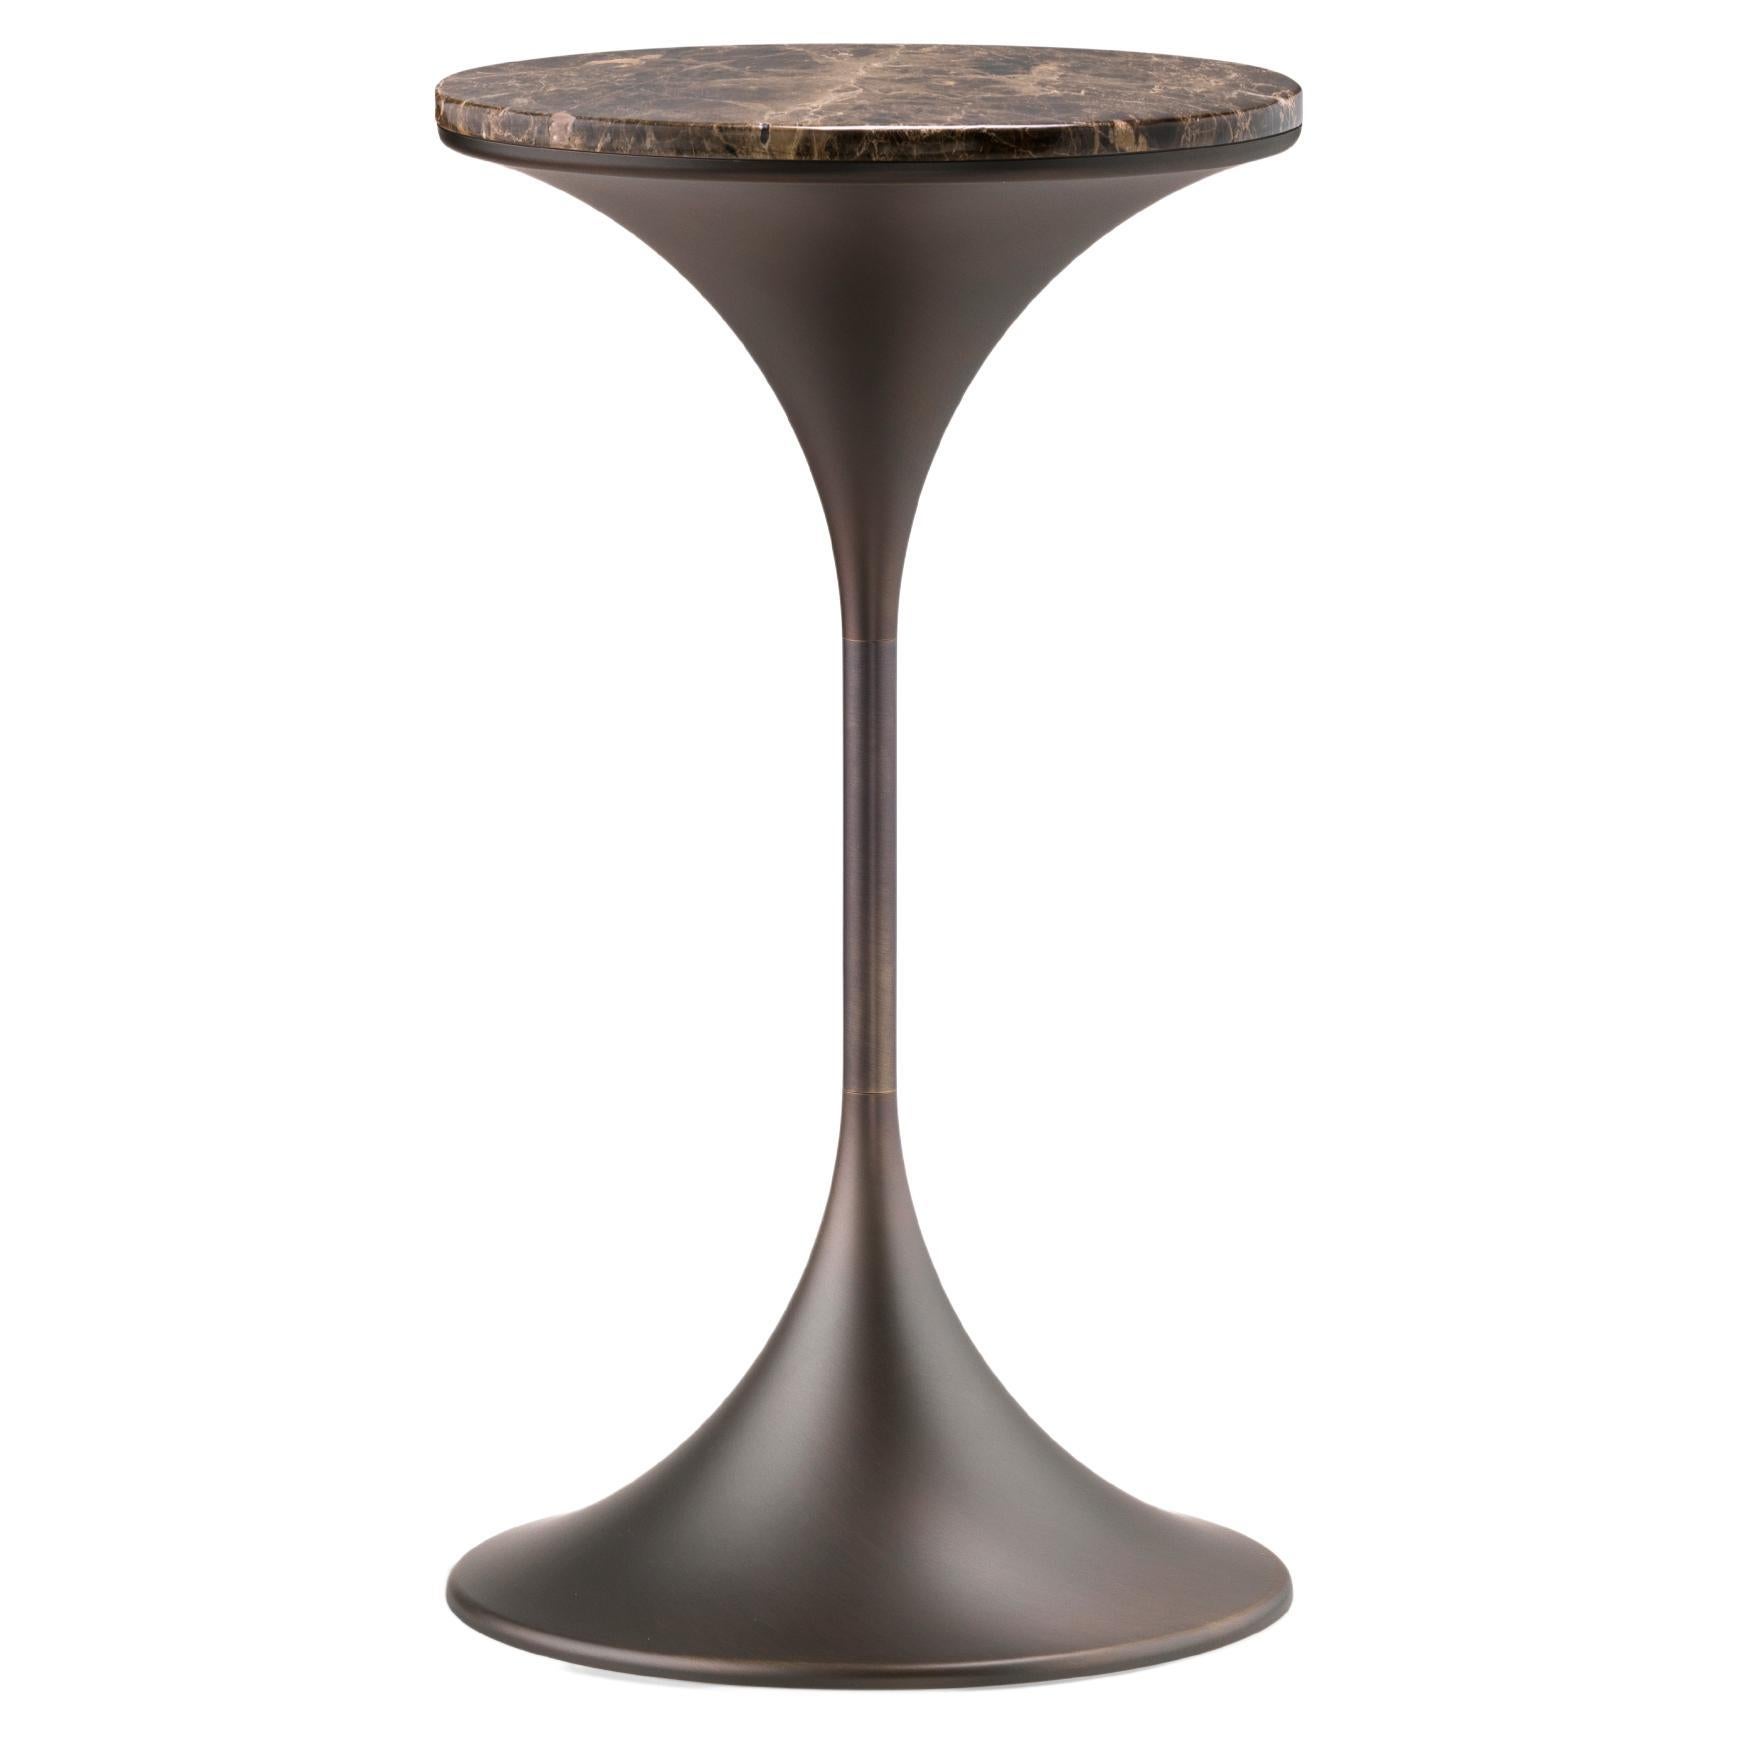 Dapertutto Tall Table, Emperador Dark Top, Burnished Brass , Made in Italy